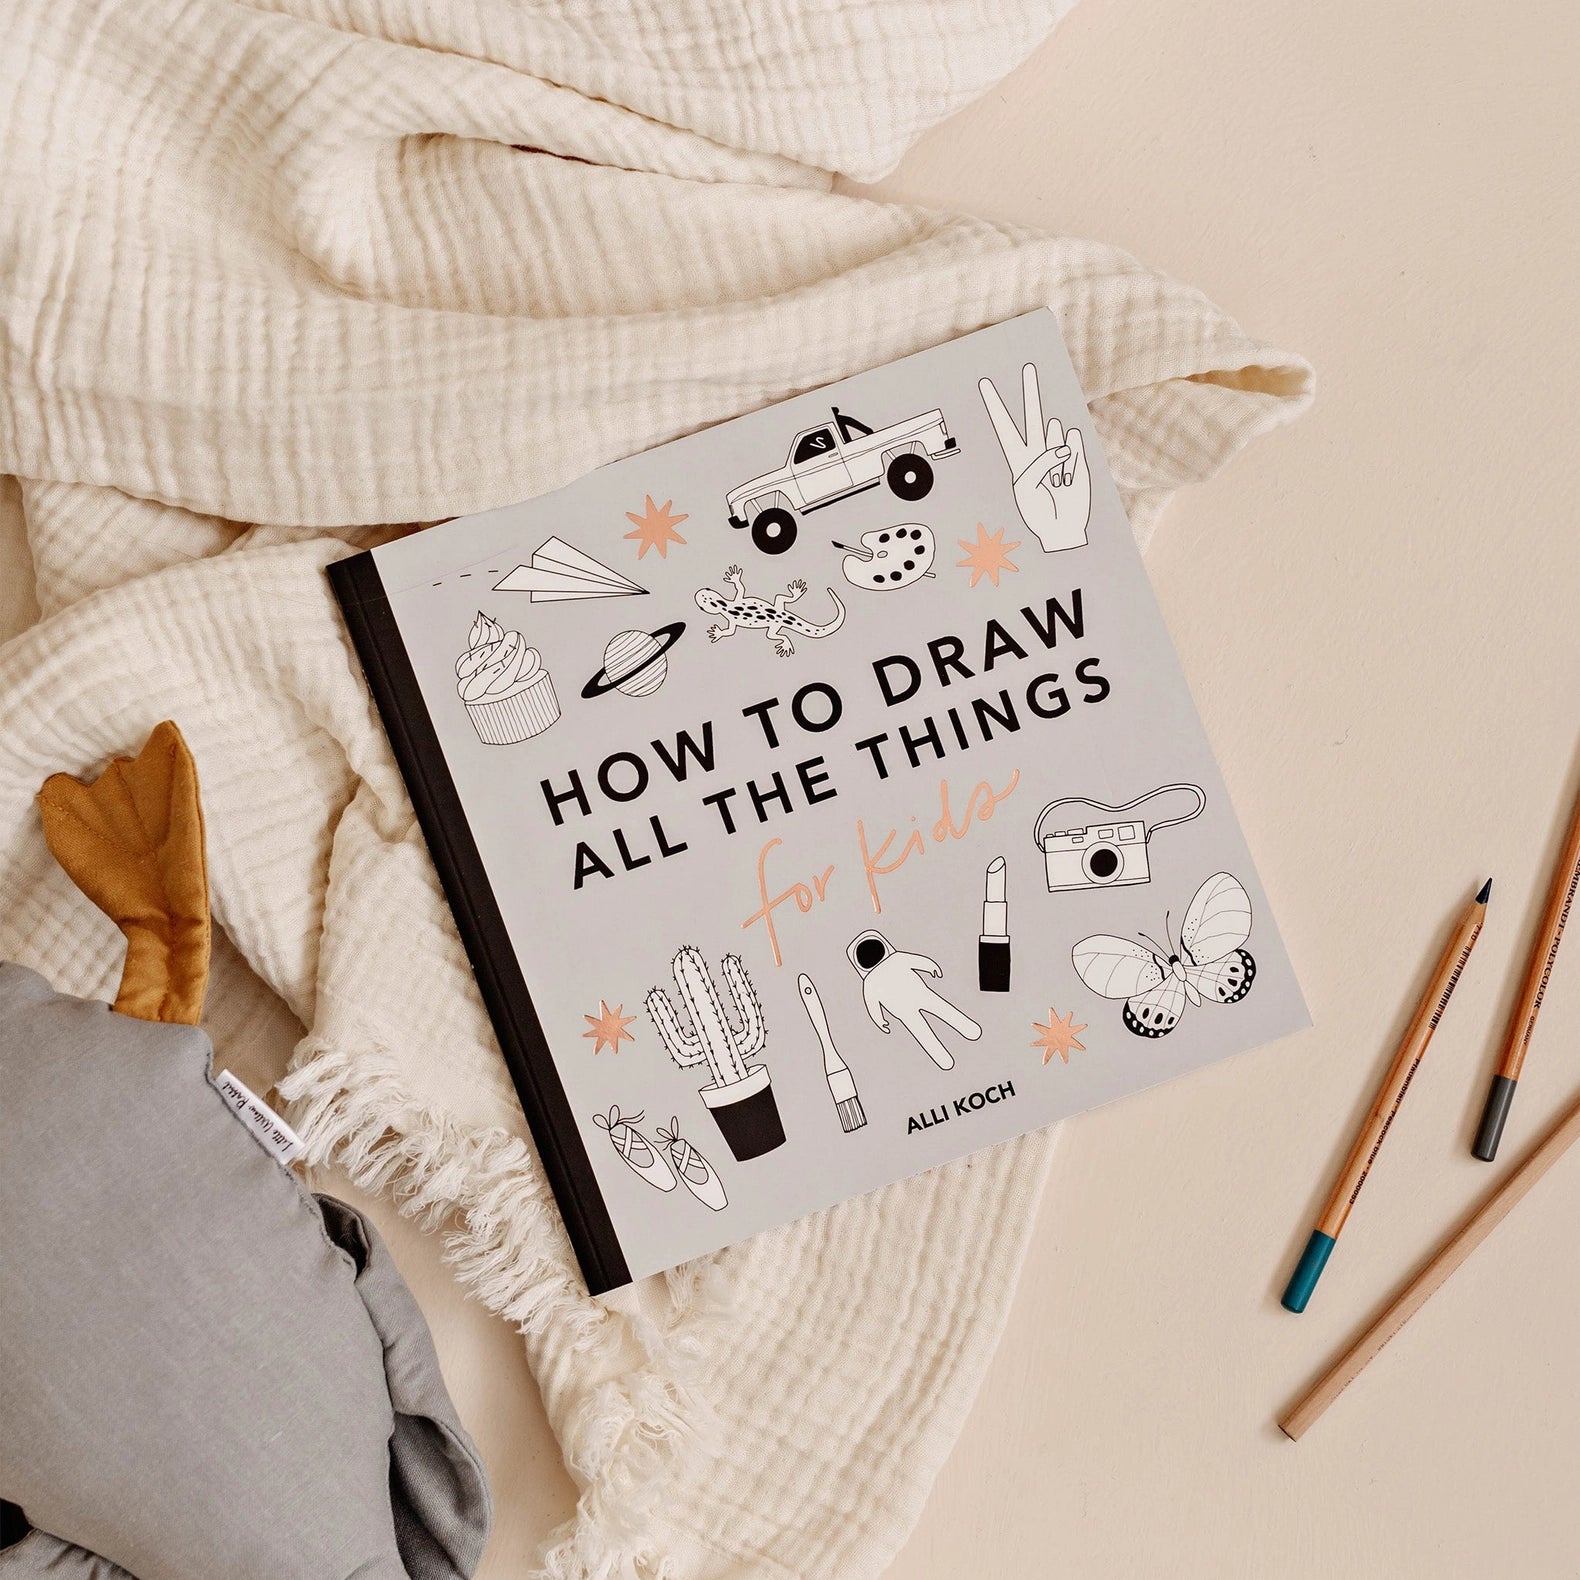 All the Things: How To Draw